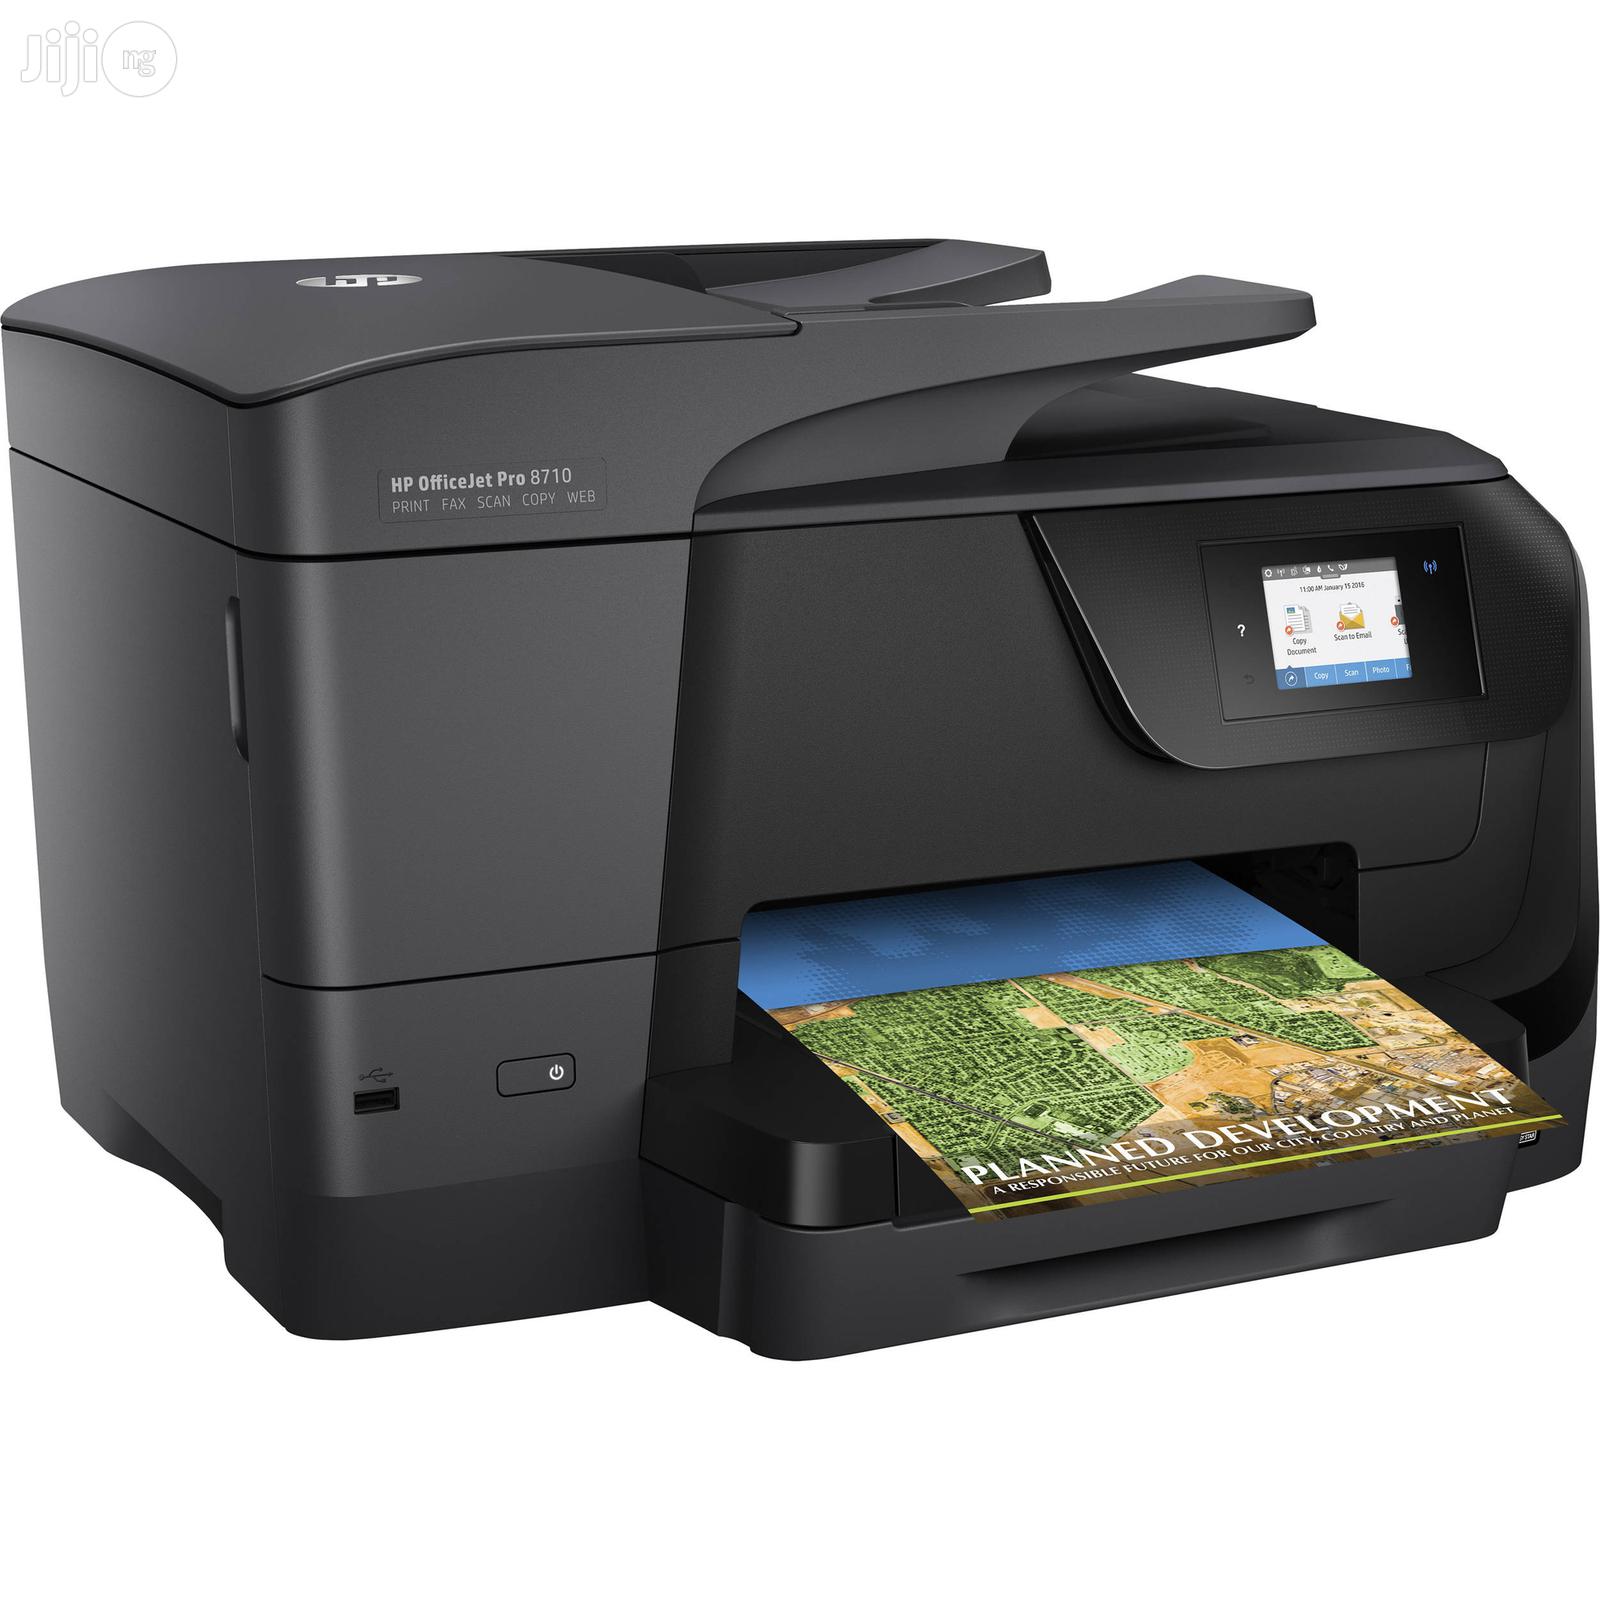 Buy Hp Officejet Pro 9013 Multifunctional Printer.r Essencial in carrying out all type of Scaning get yours now at machito Gadgets and enjoy..